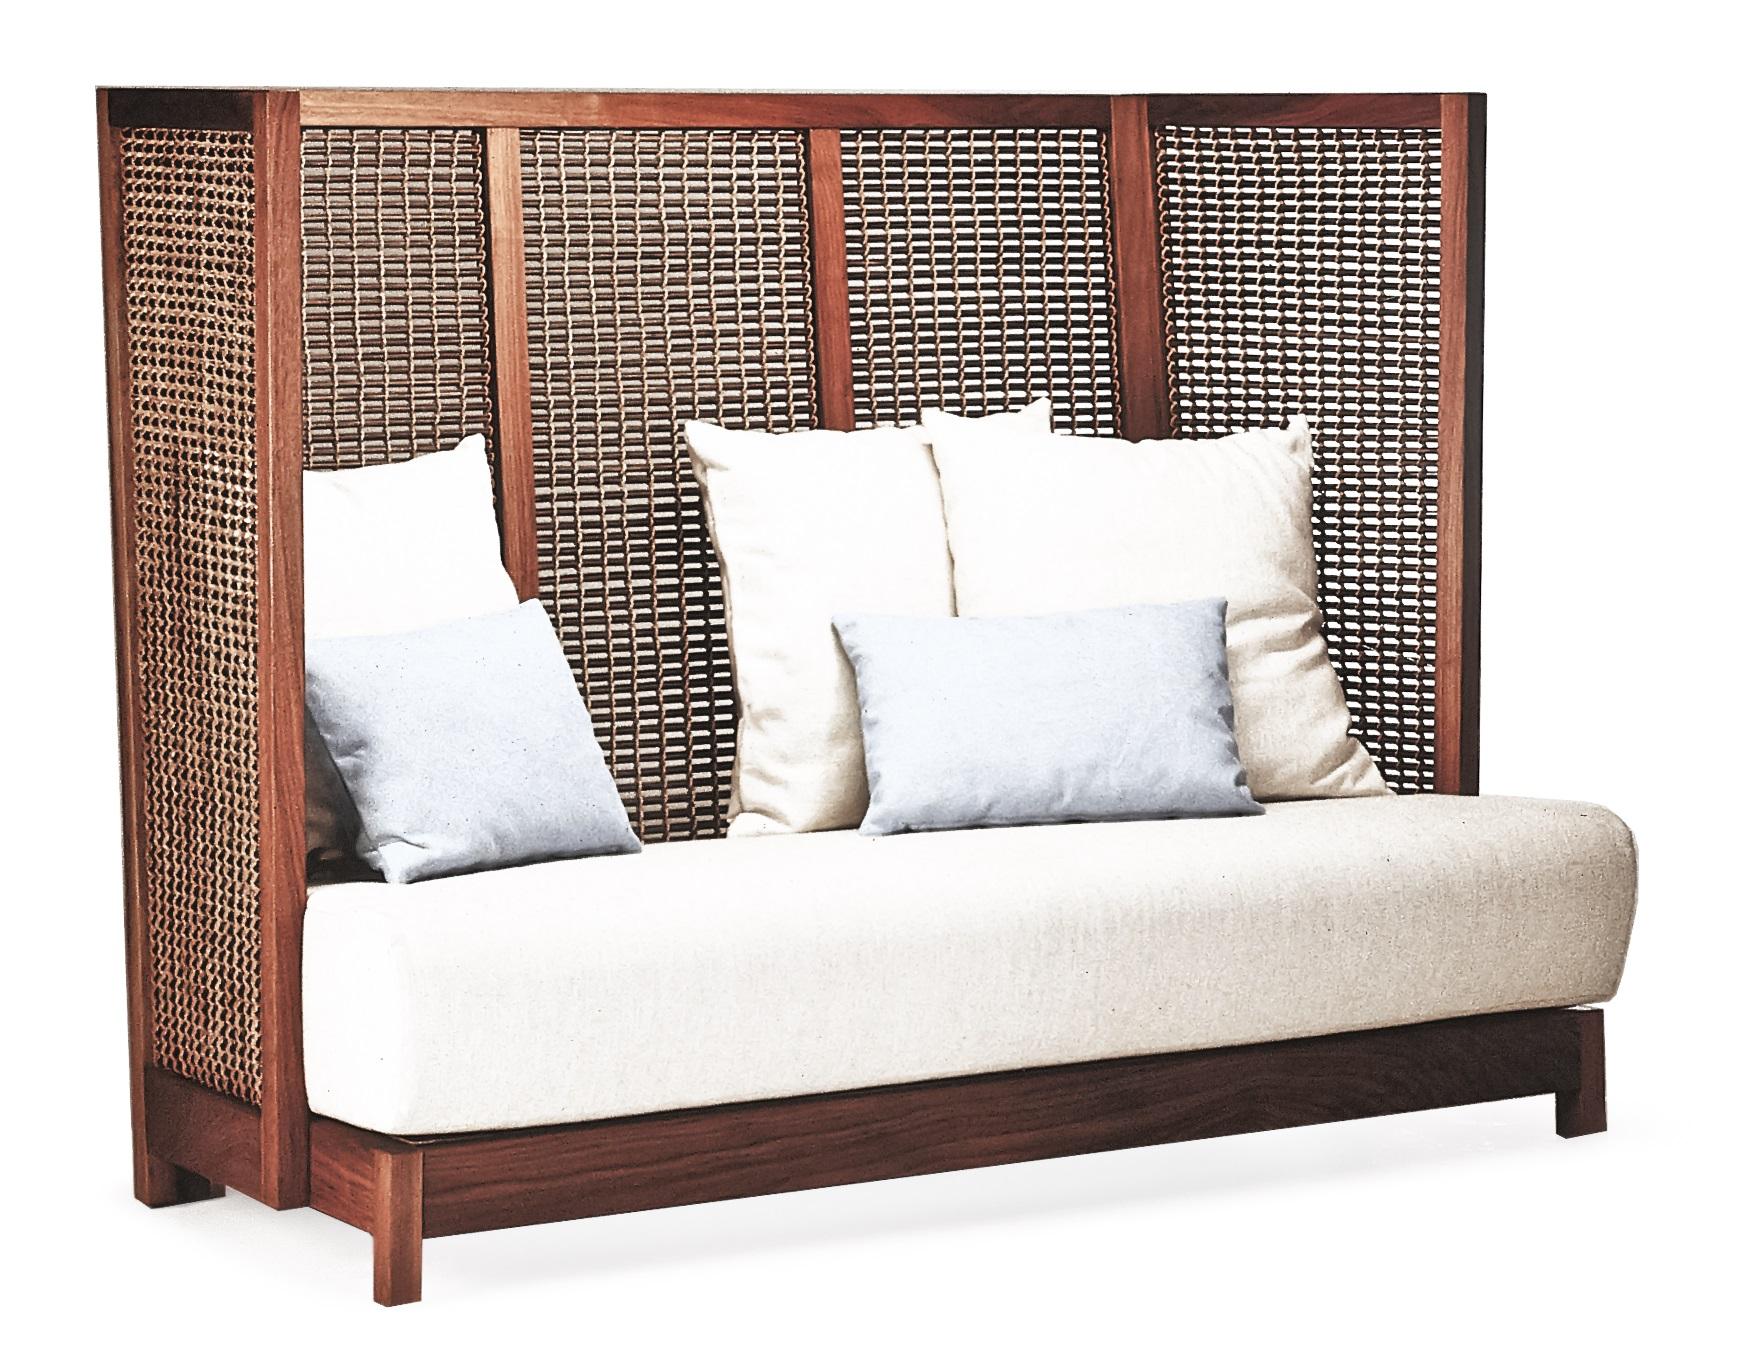 Walnut highback Suzy Wong loveseat by Kenneth Cobonpue.
Materials: Lampakanai, rattan, walnut. 
Also available in maple. 
Dimensions: 75 cm x 164.5 cm x H 122 cm

Woven panels create a feeling of intimacy as you and your guests indulge in